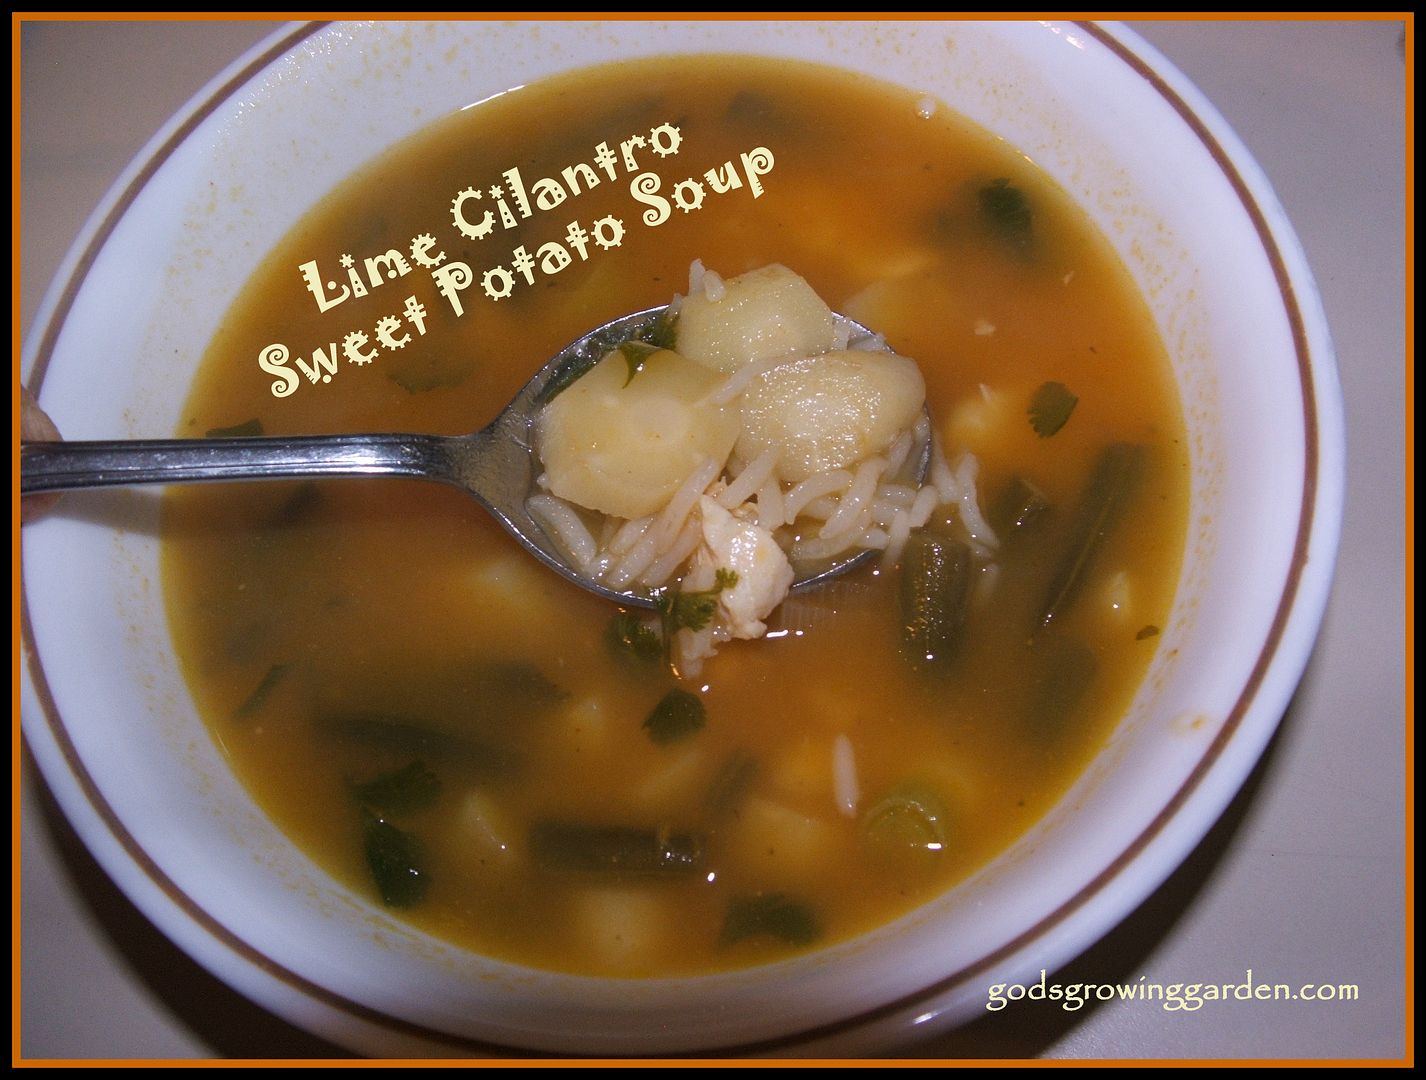 Lime Cilantro Sweet Potato Soup, by Angie Ouellette-Tower for godsgrowinggarden.com